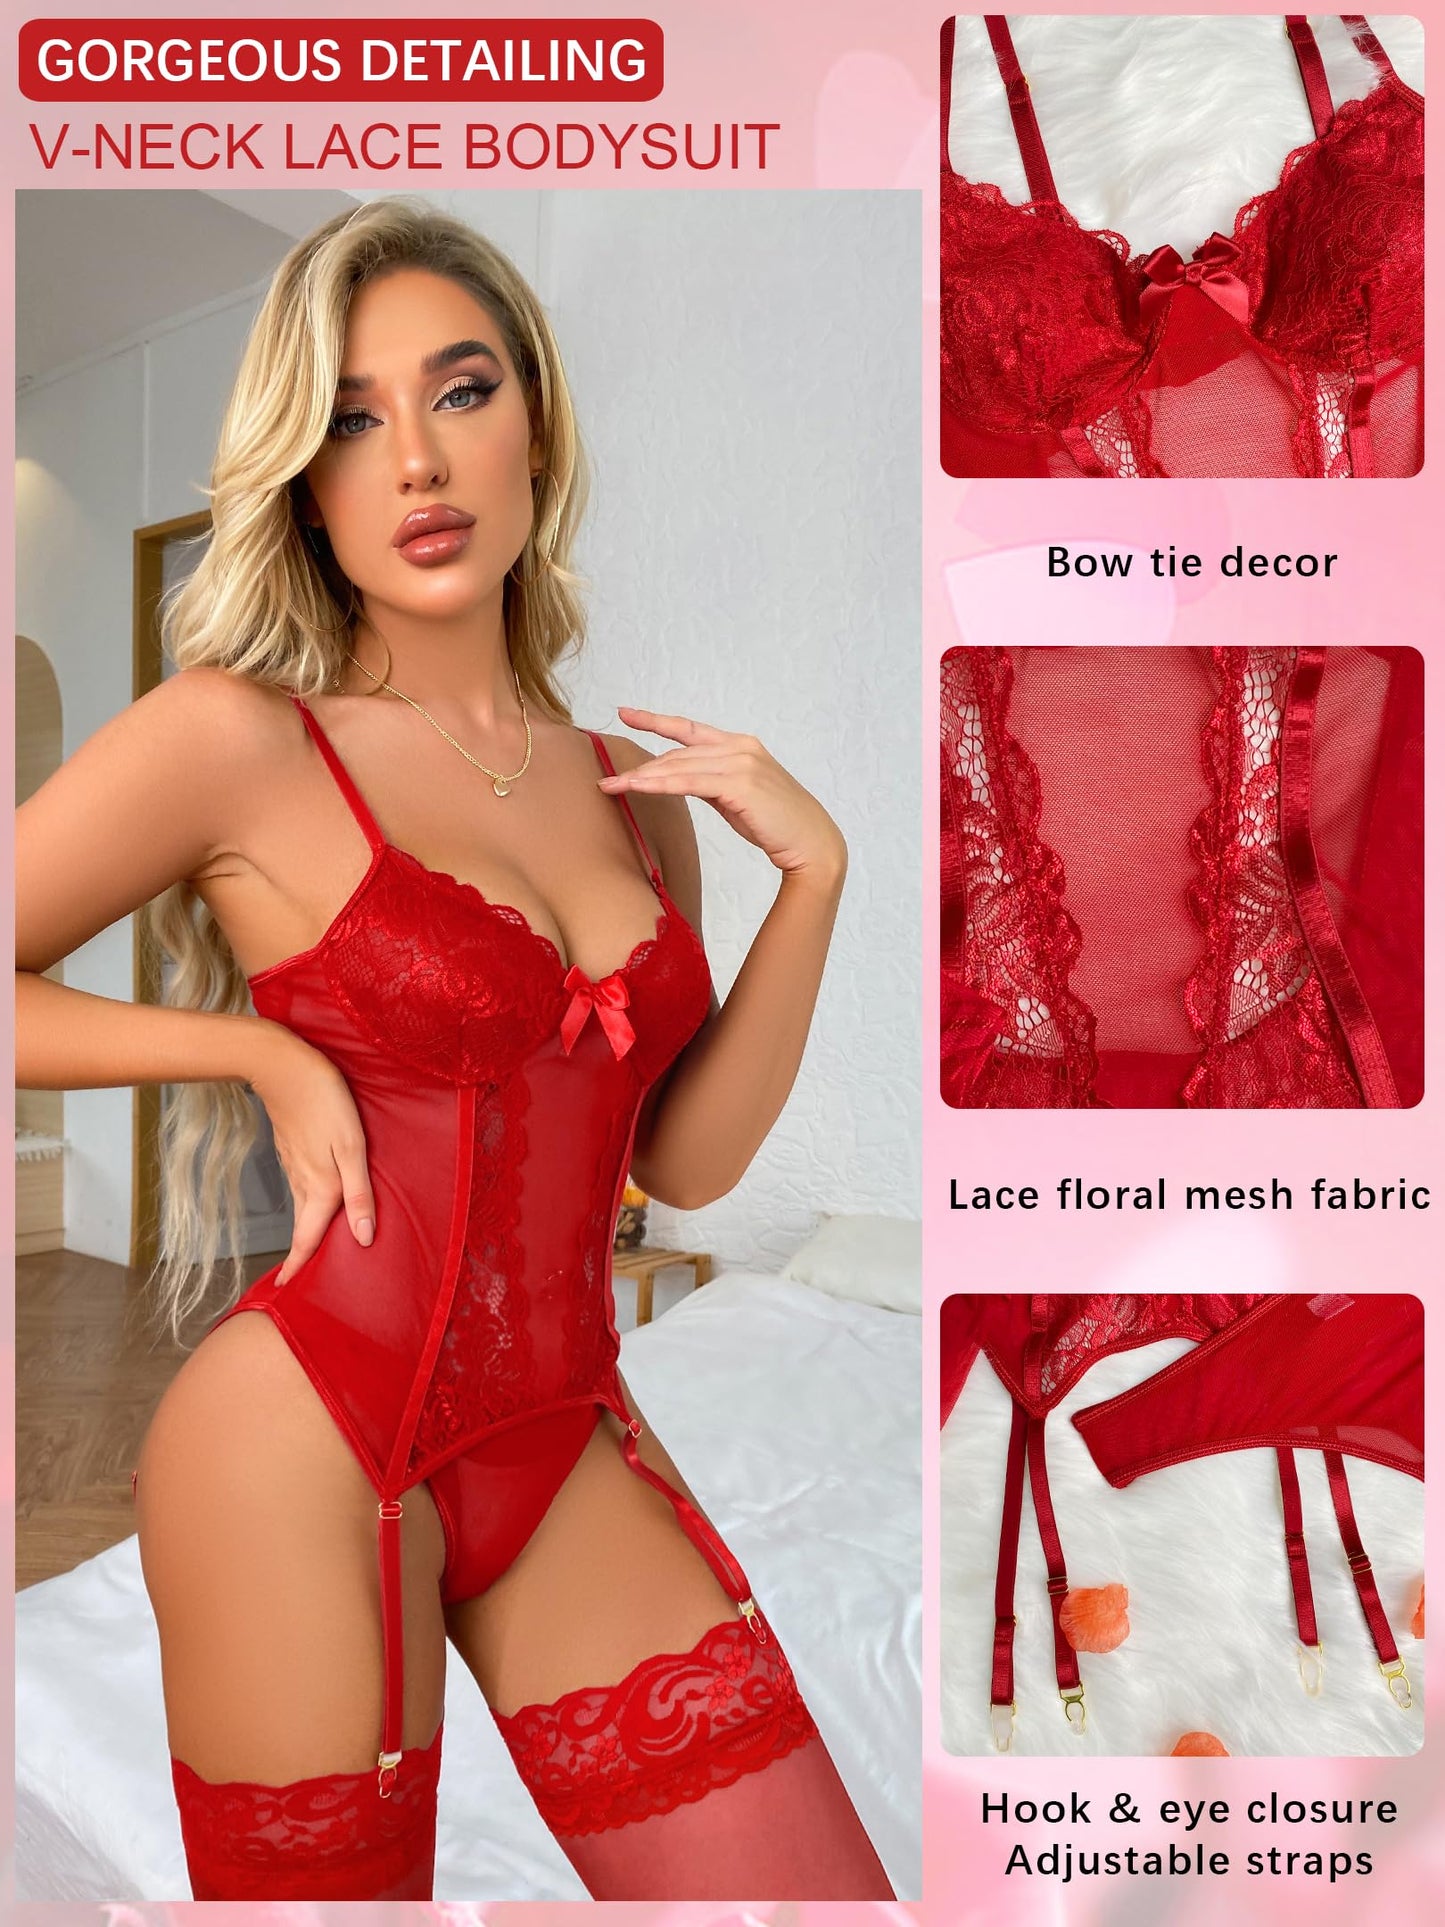 ssyyx Women's Sexy Lingerie Set with Garter Belt Lace Bodysuit Teddy Baby Dolls Panty with Stockings Red